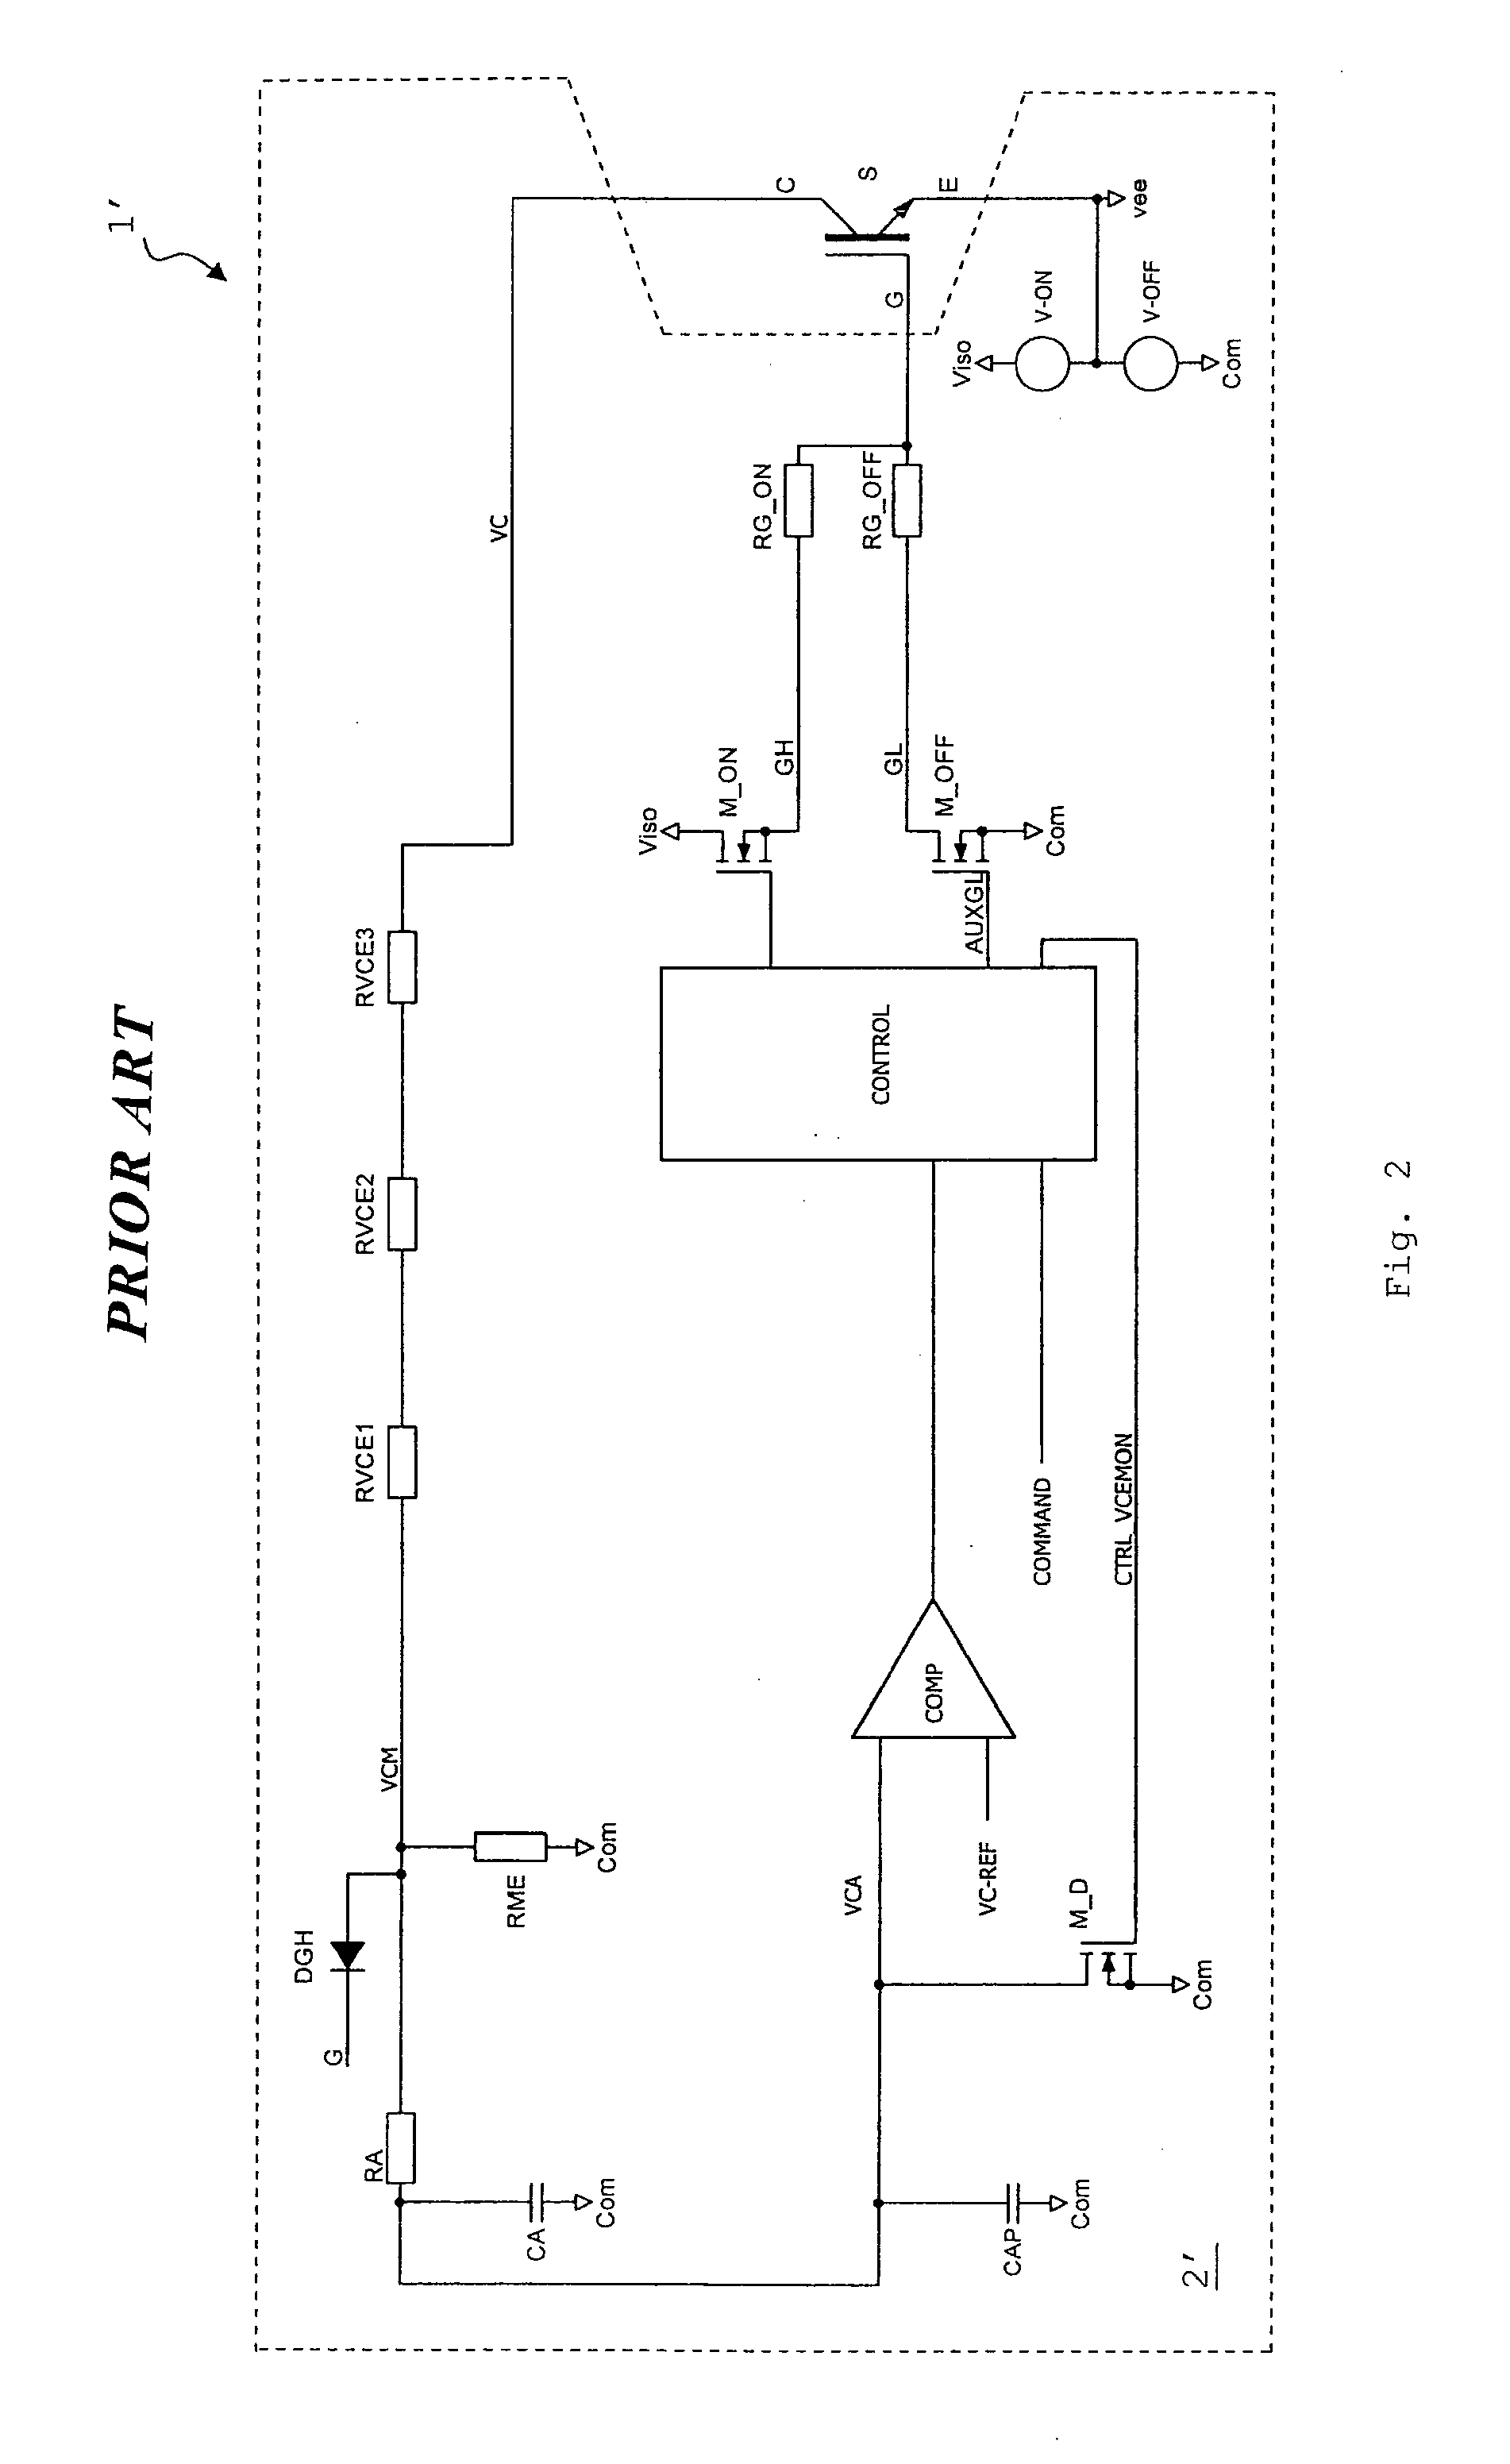 Control circuit and method for controlling a power semiconductor switch